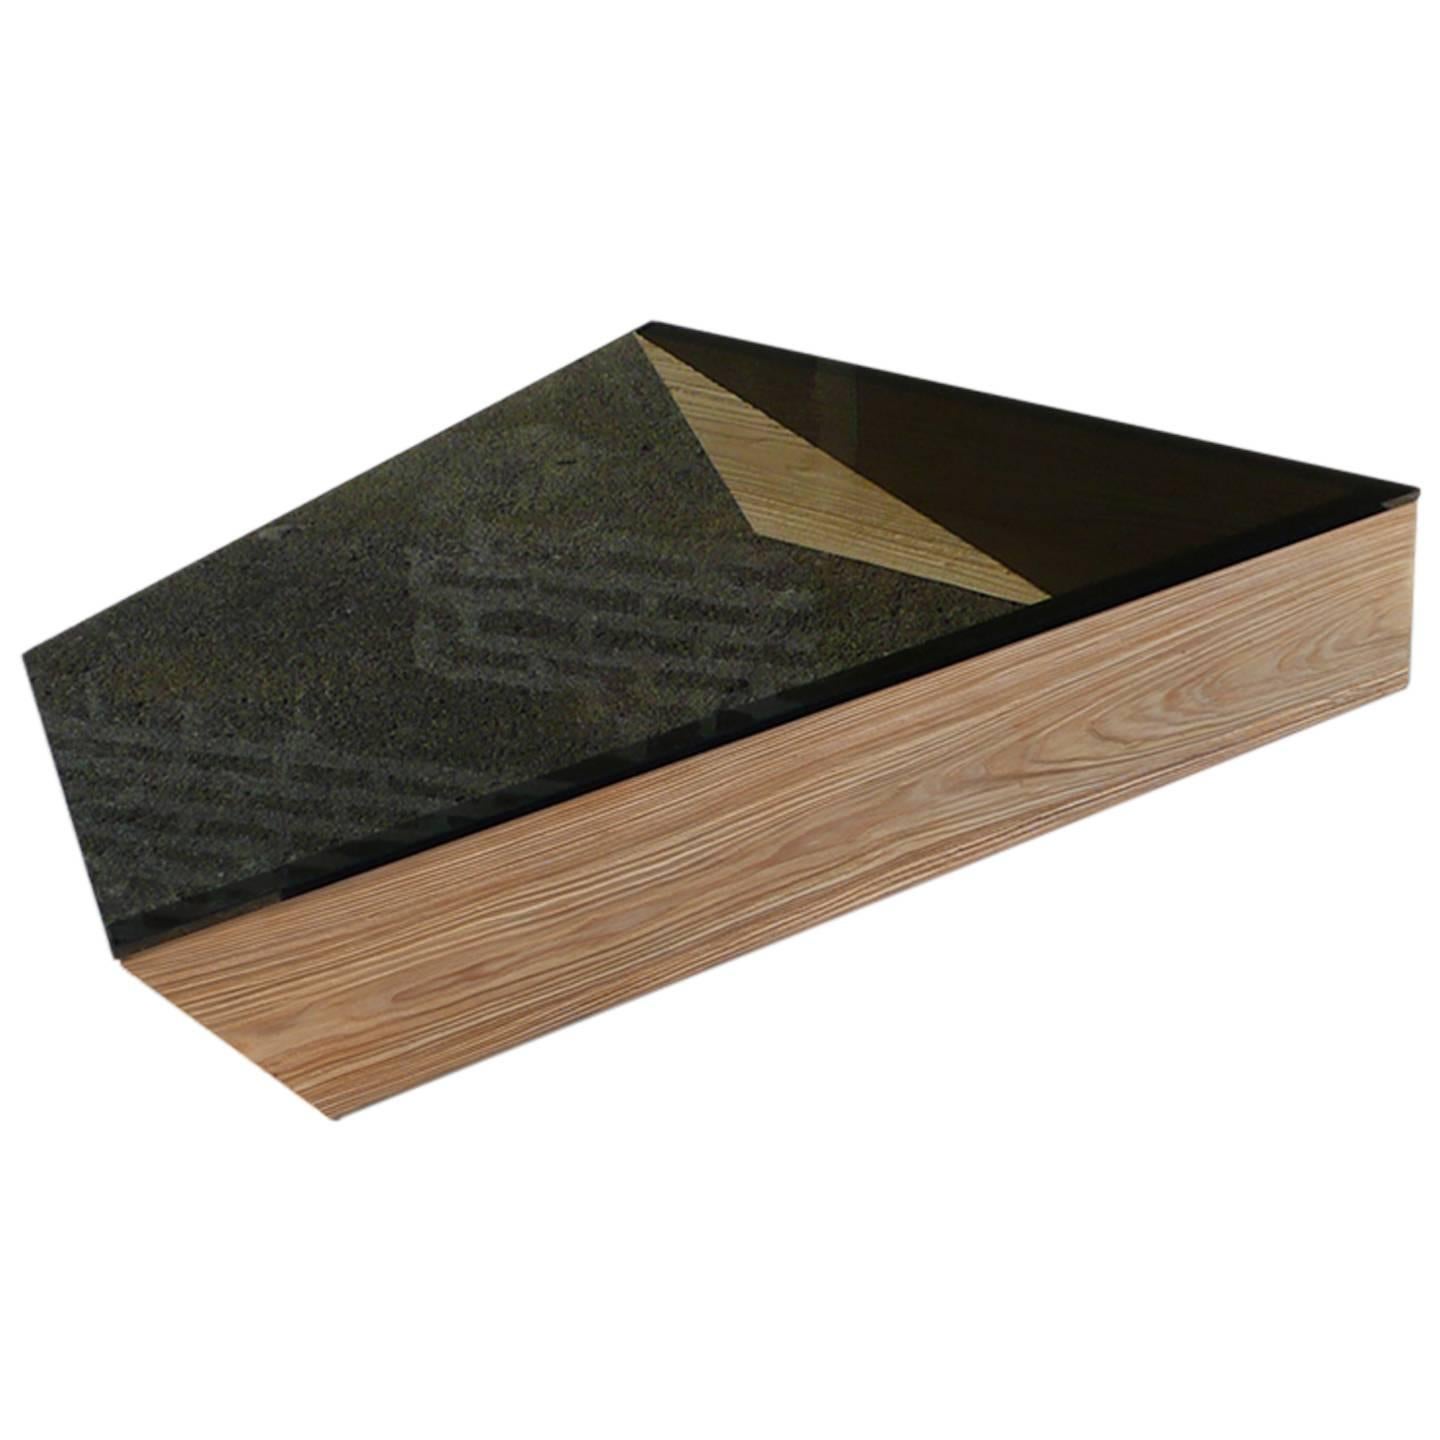 DRIFT - Weathered Cypress Wood and Smoked Glass Minimal Geometric Coffee Table For Sale